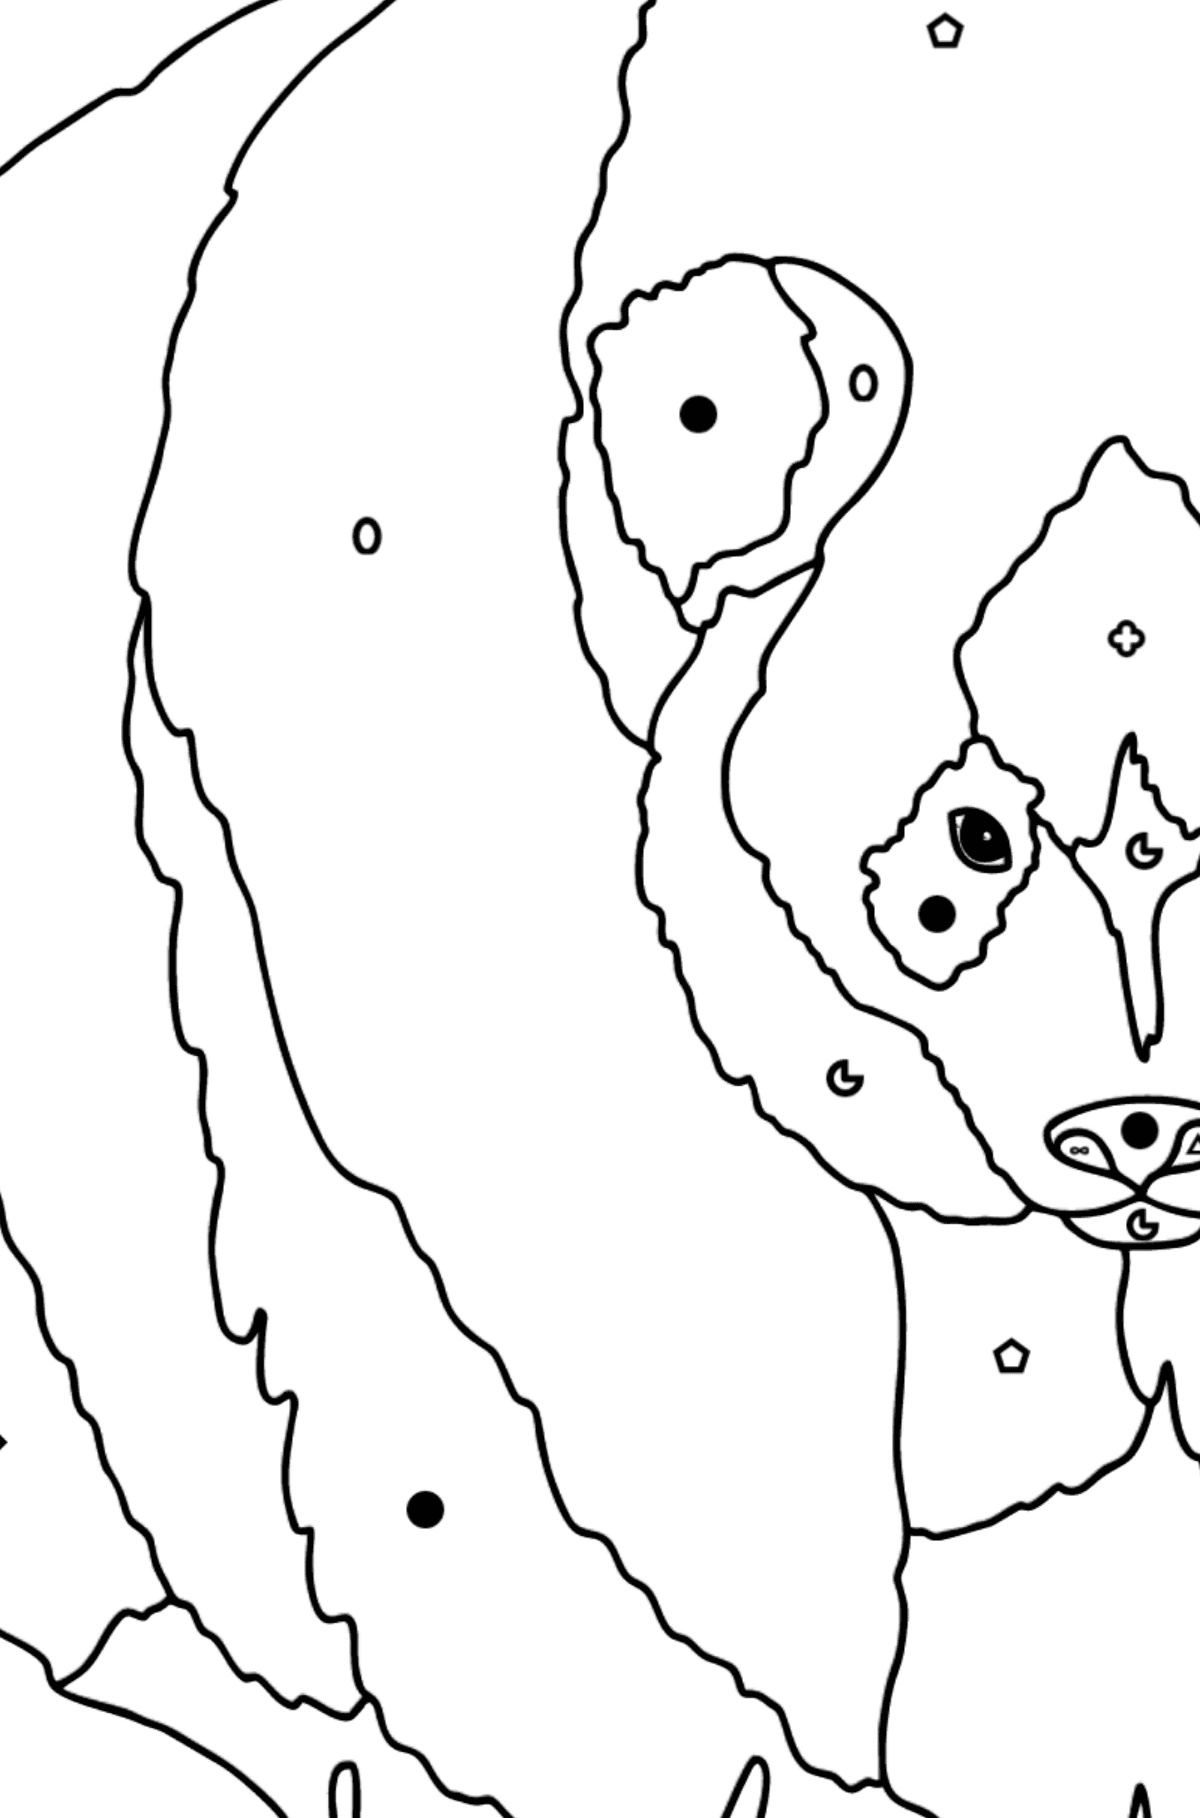 Coloring Page - A Panda is on a Hunt - Coloring by Symbols and Geometric Shapes for Kids